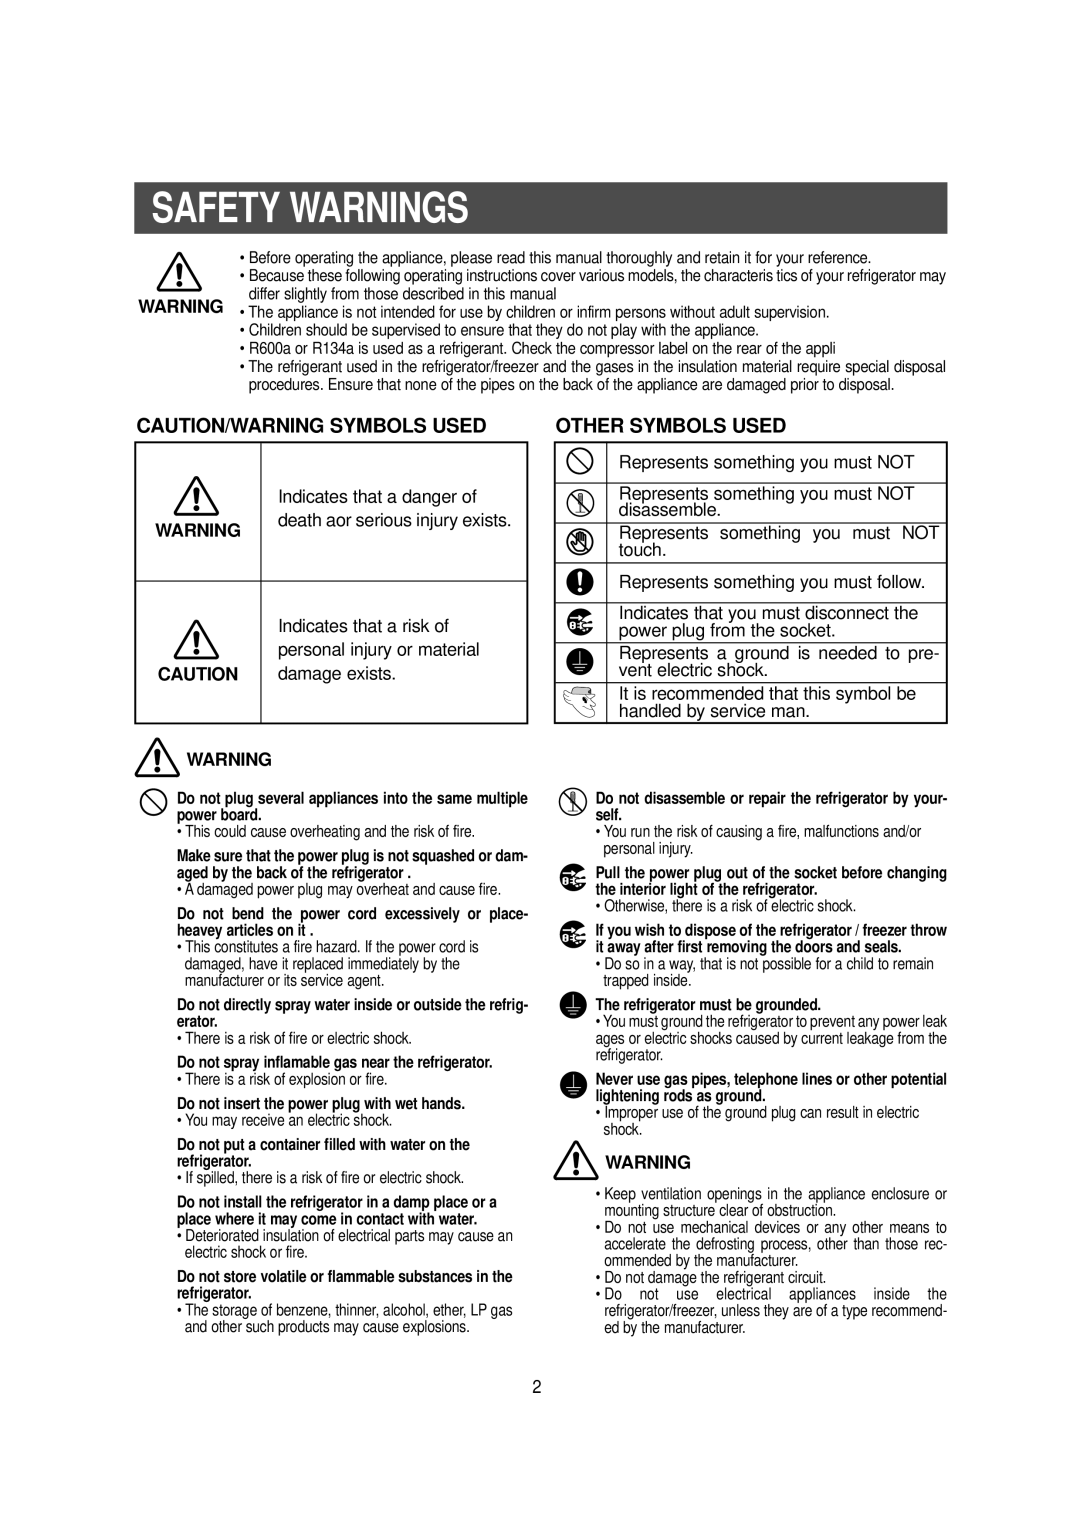 Samsung SRS536NP owner manual Safety Warnings, Caution/Warning Symbols Used, Other Symbols Used 